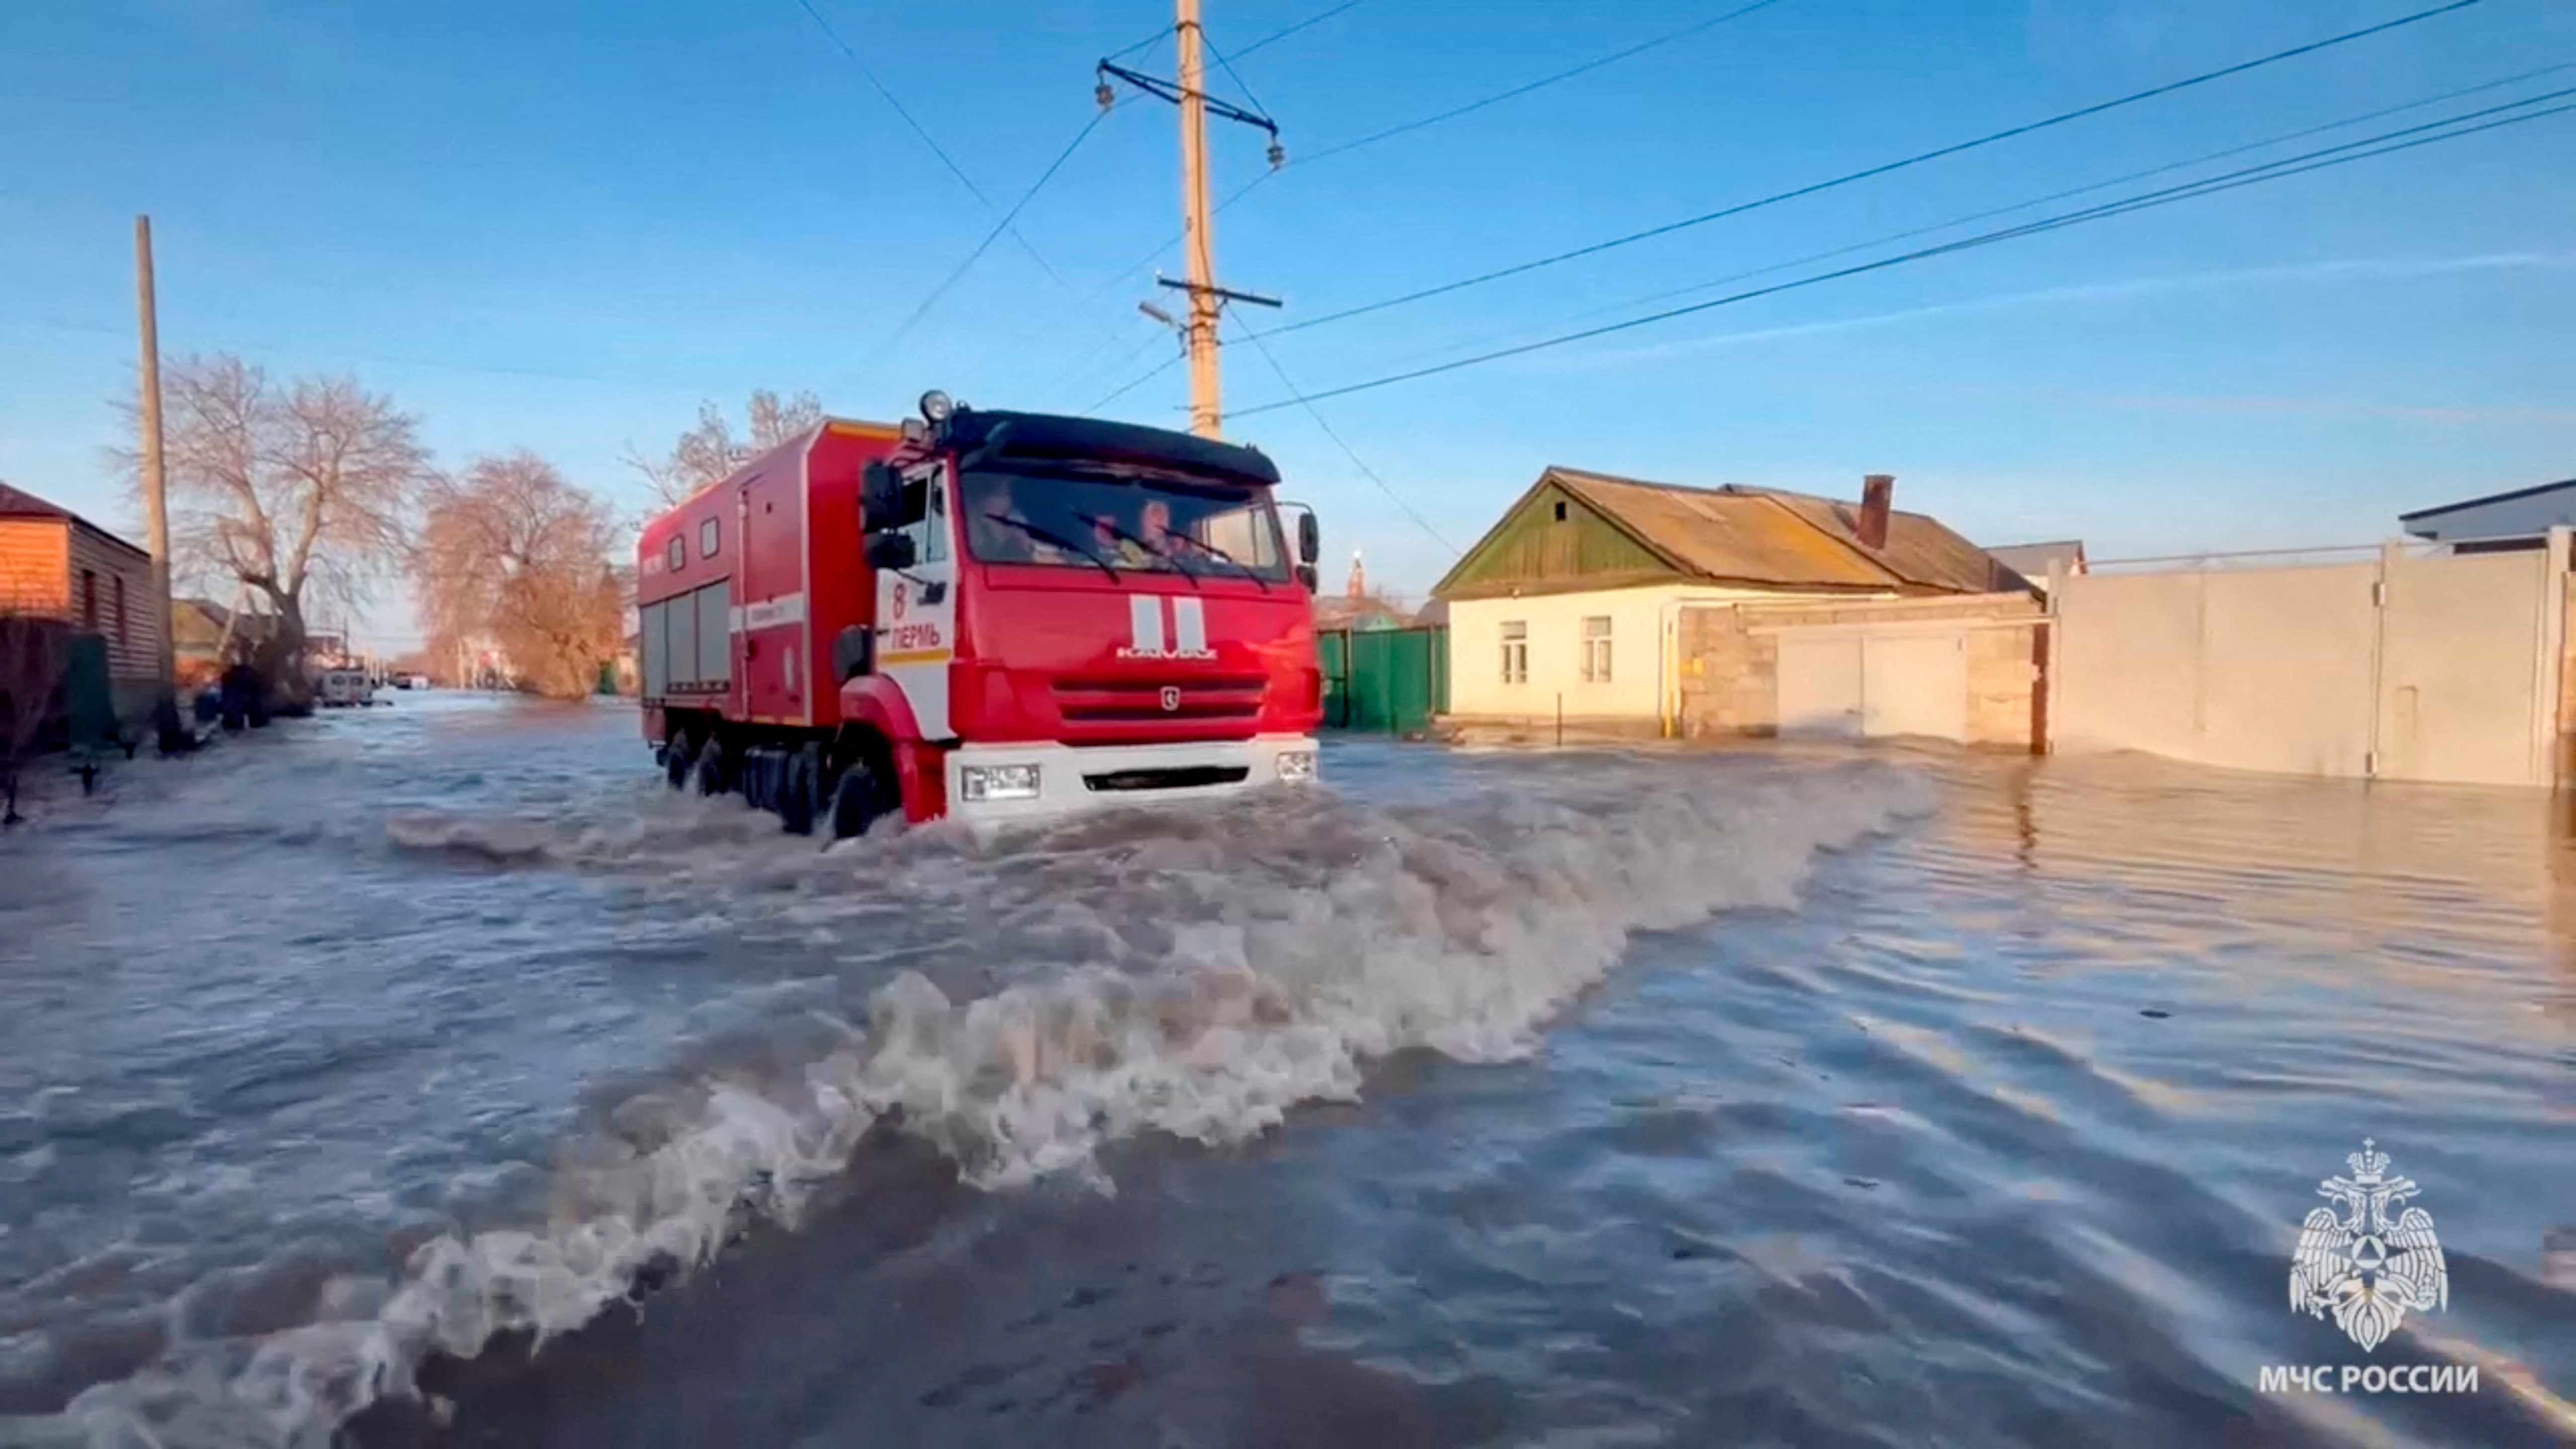 Evacuation from homes in flood-hit Orsk